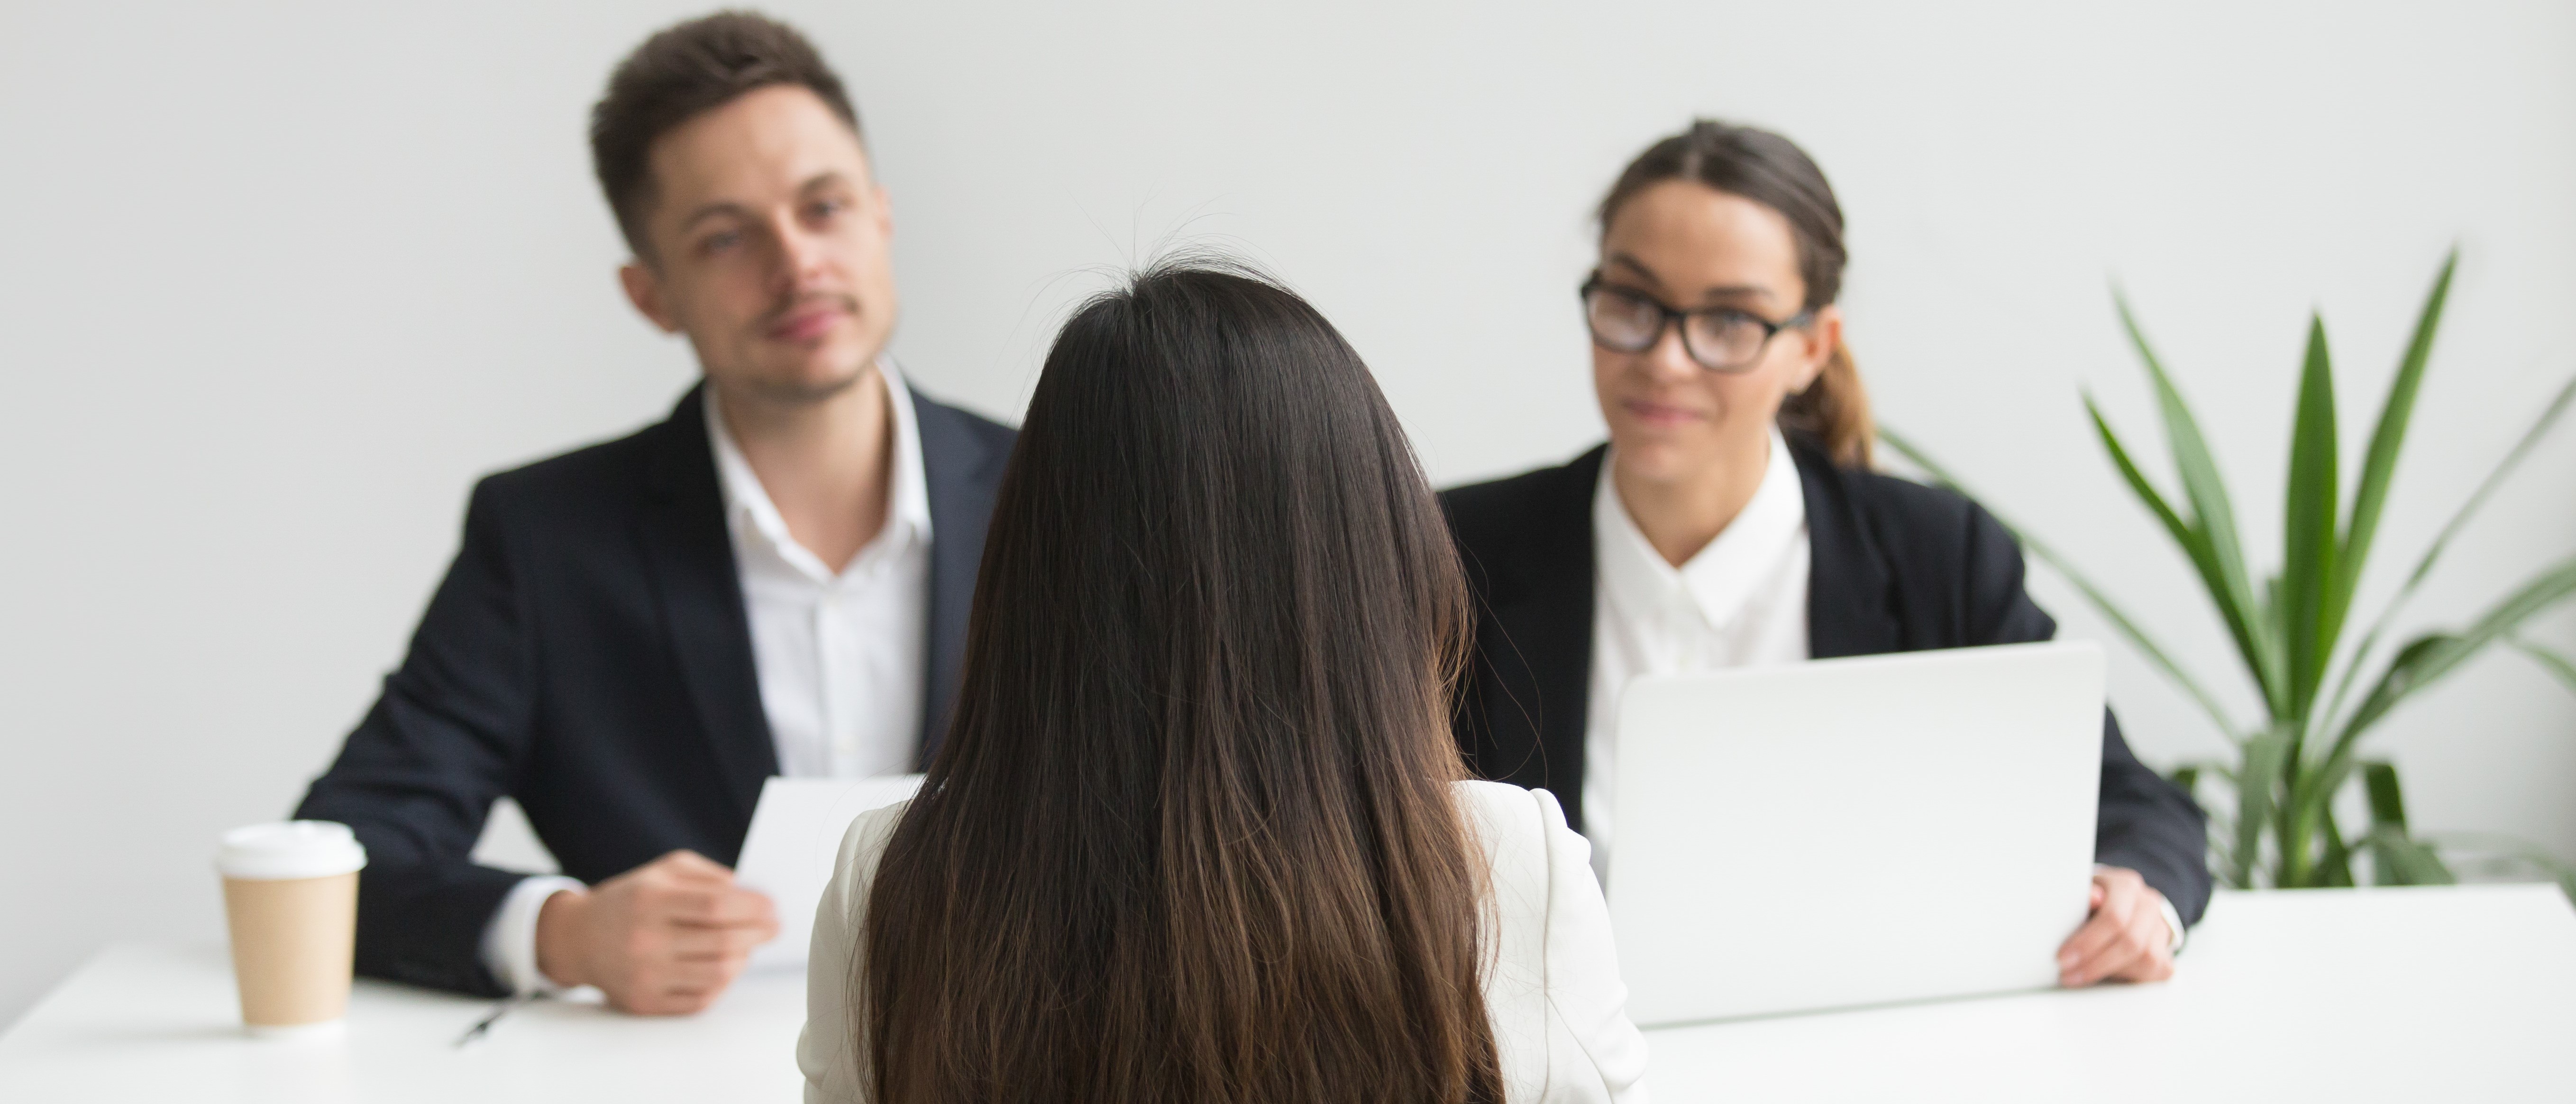 When to consider hiring candidates without experience